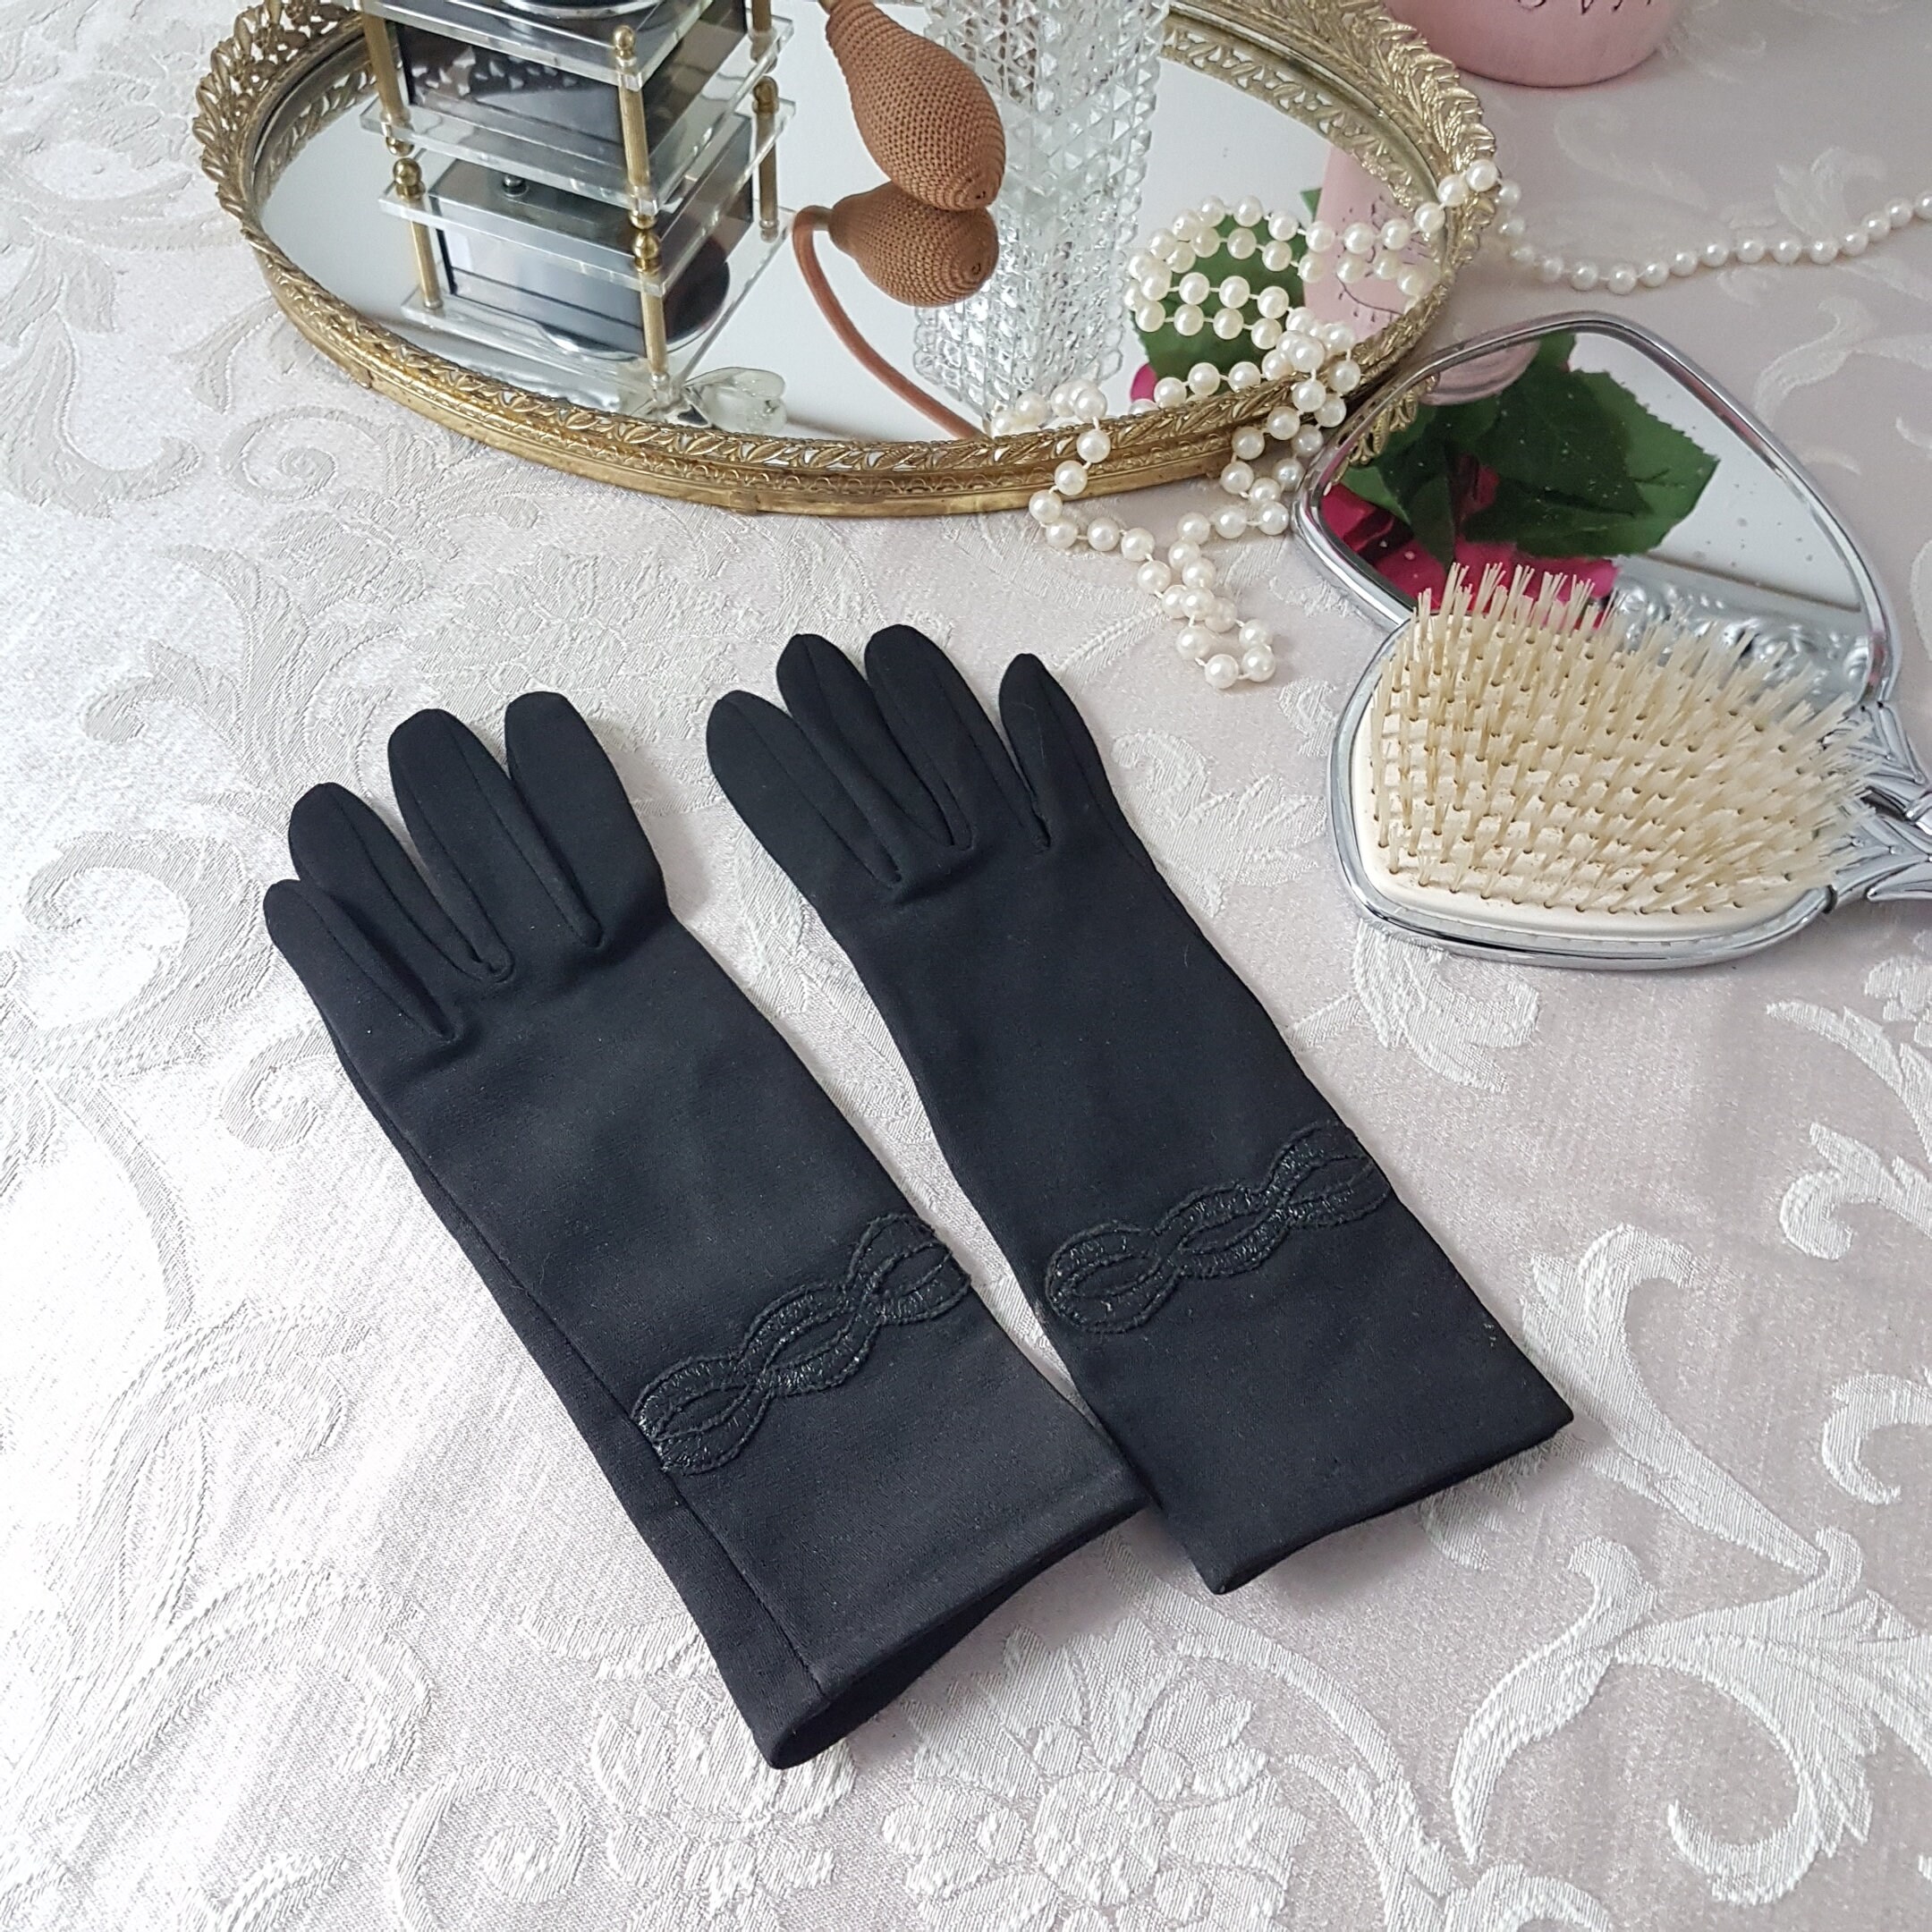 Max Mayer's Gloves, Black Formal Ladies Gloves, Wedding Cocktail Prom  Formal Accessory, Made in Hong Kong, 1950s